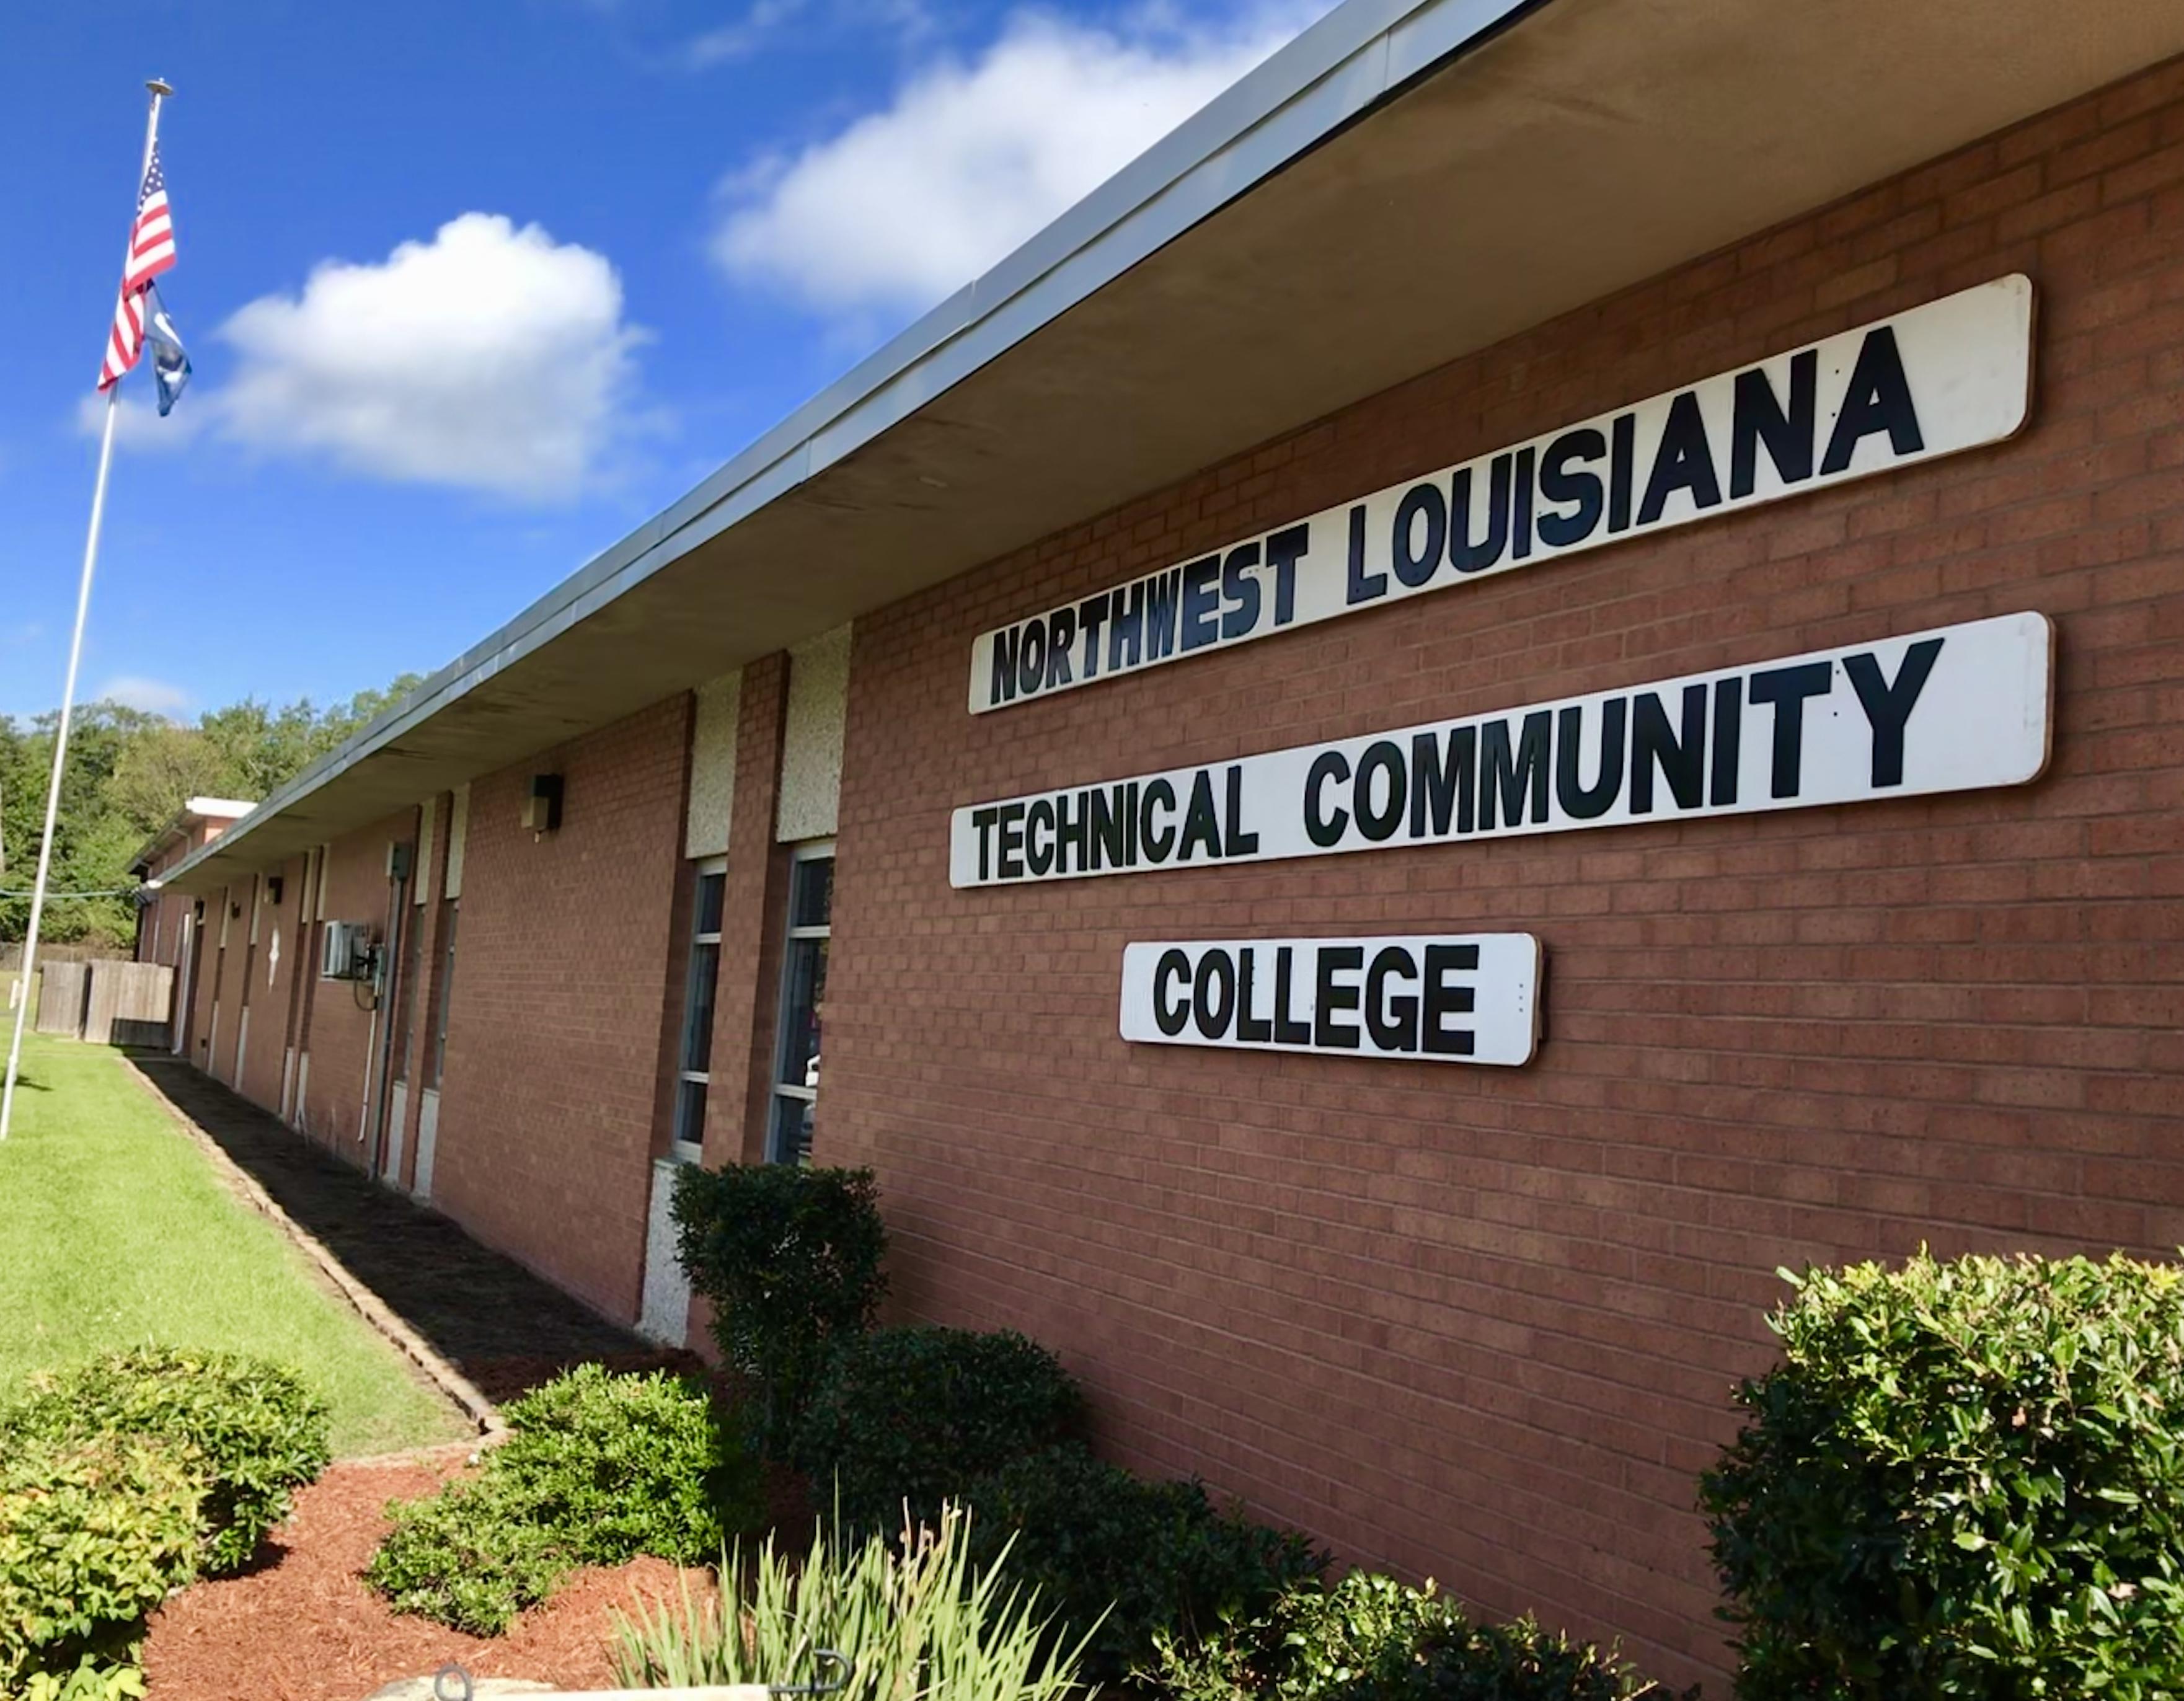 Mansfield Campus at Northwest Louisiana Technical Community College